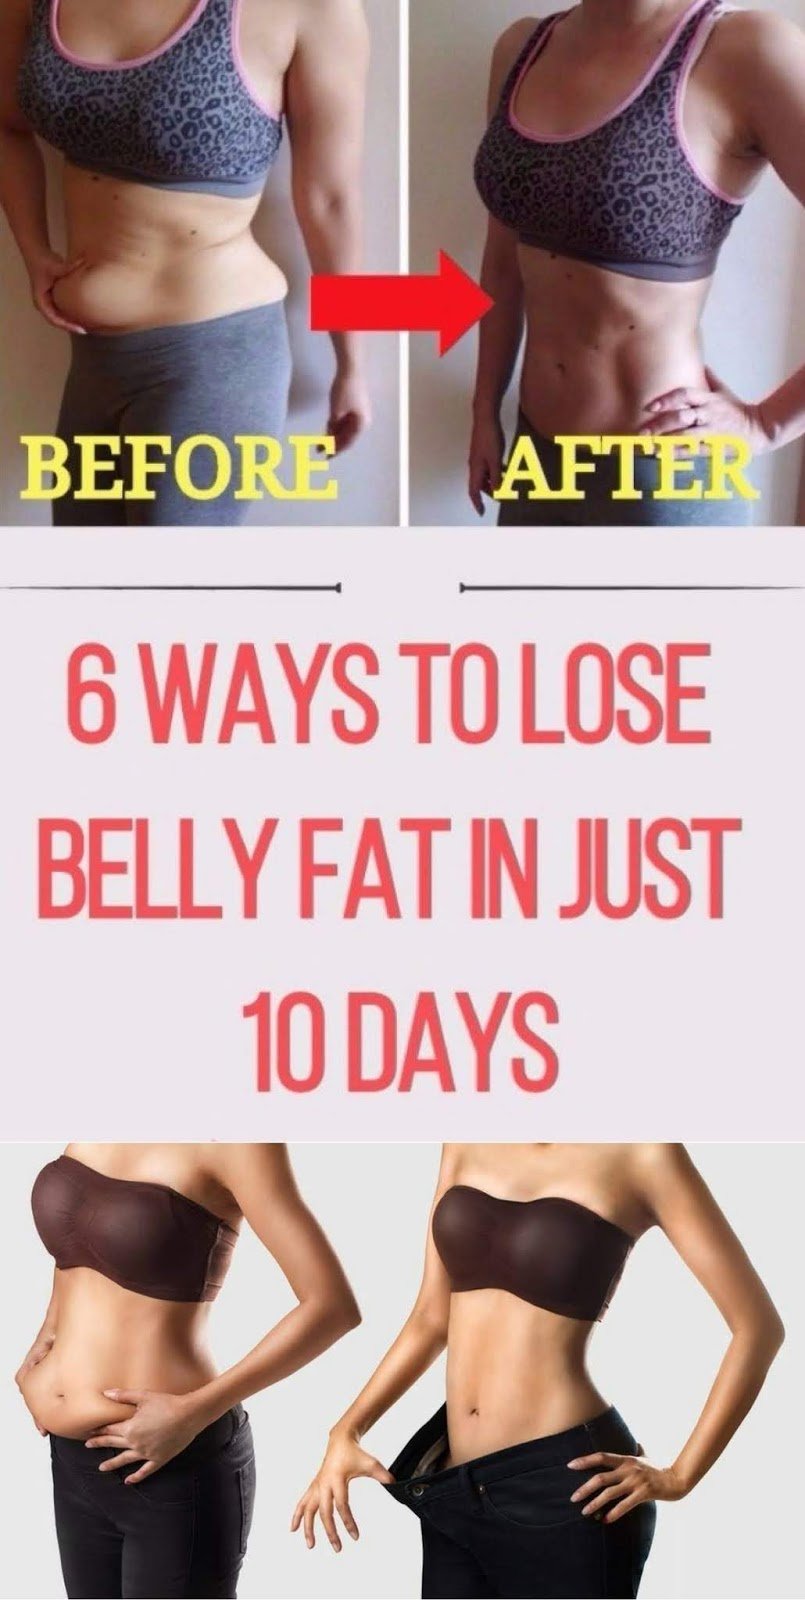 Lose Stomach Fat Easily In 10 Days With These 6 Useful ...